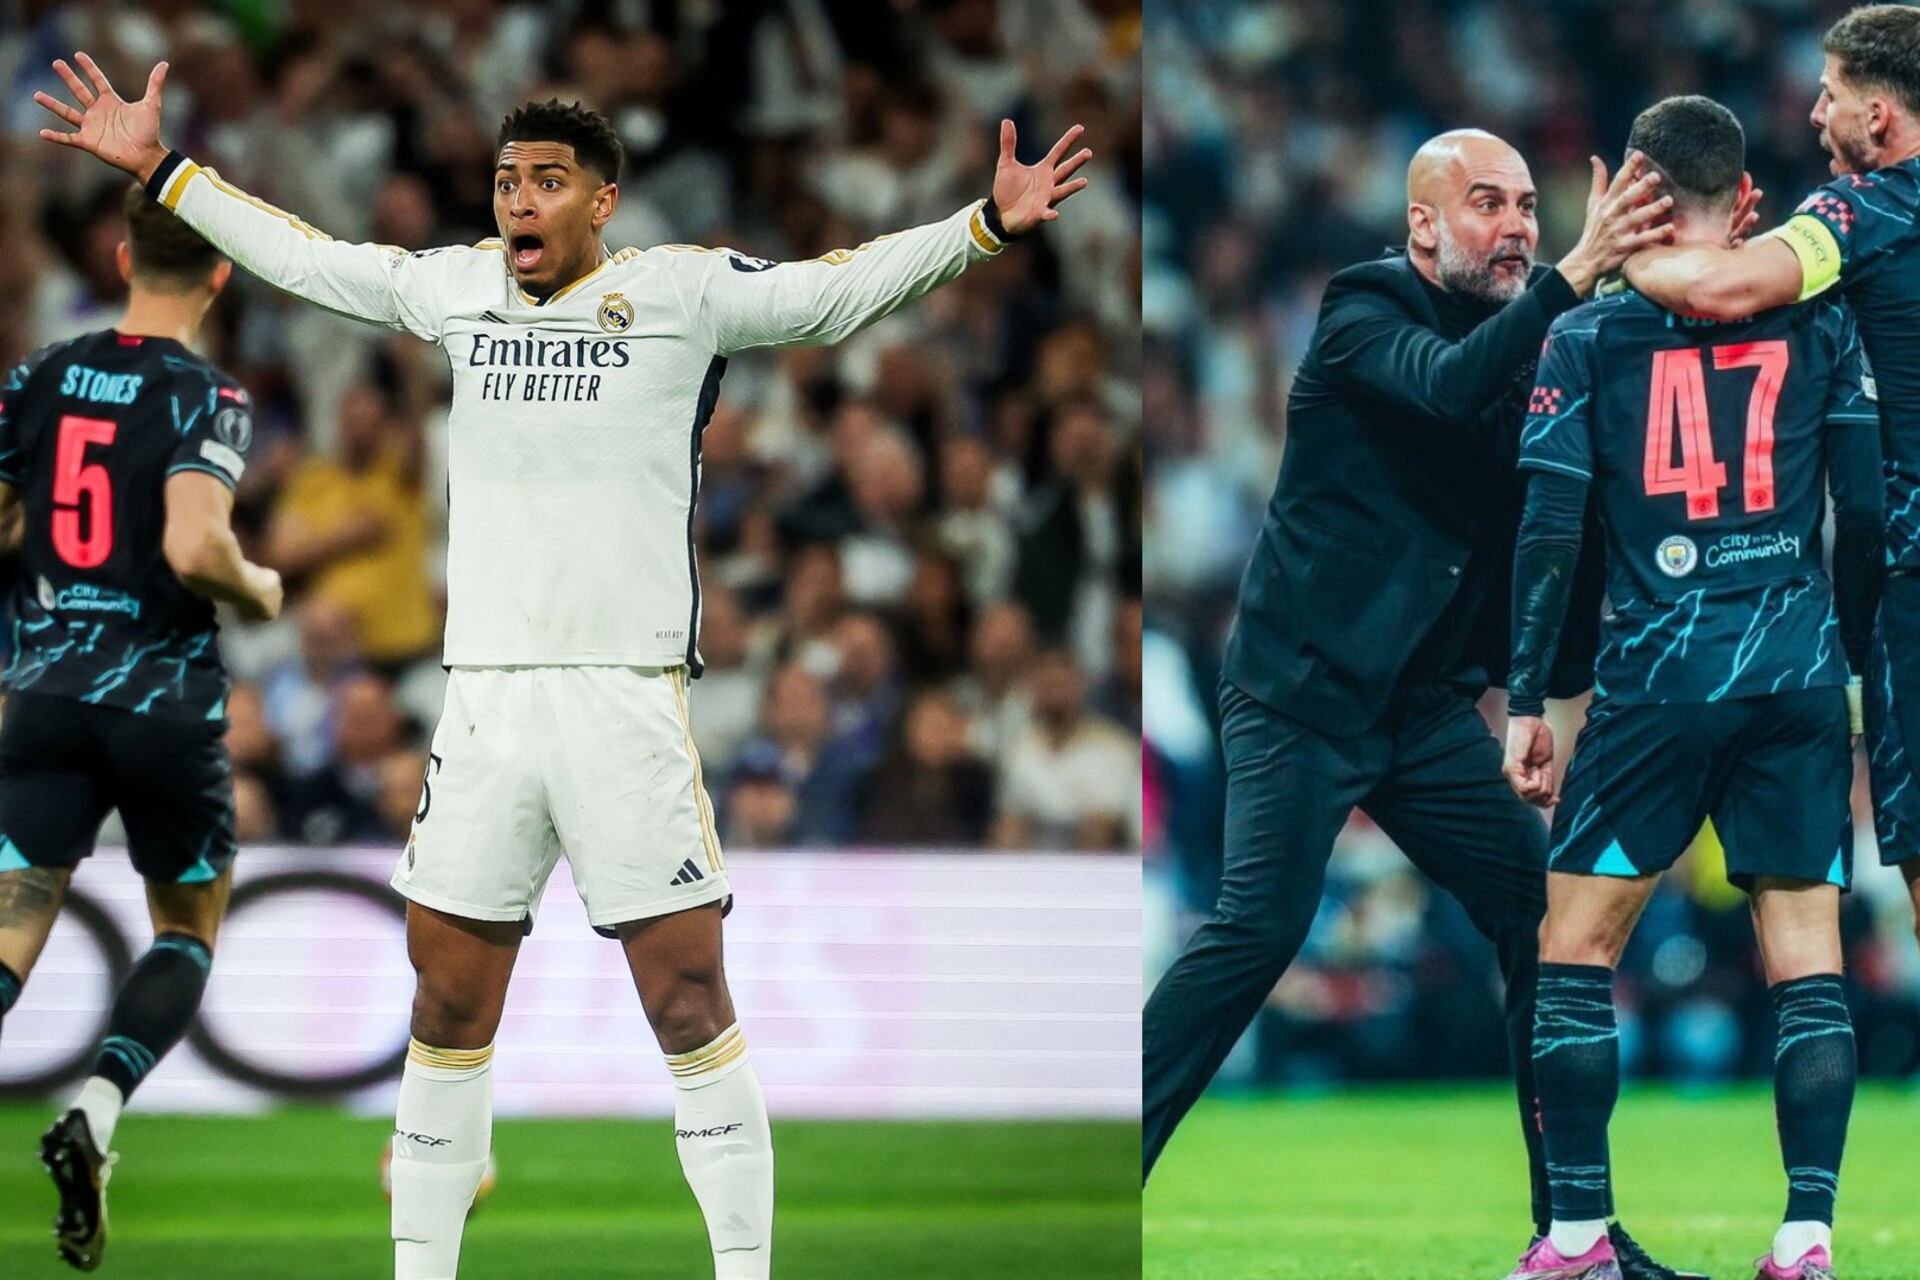 (VIDEO) Guardiola and Ancelotti's Masterclass! Real Madrid 3 City 3 in Champions